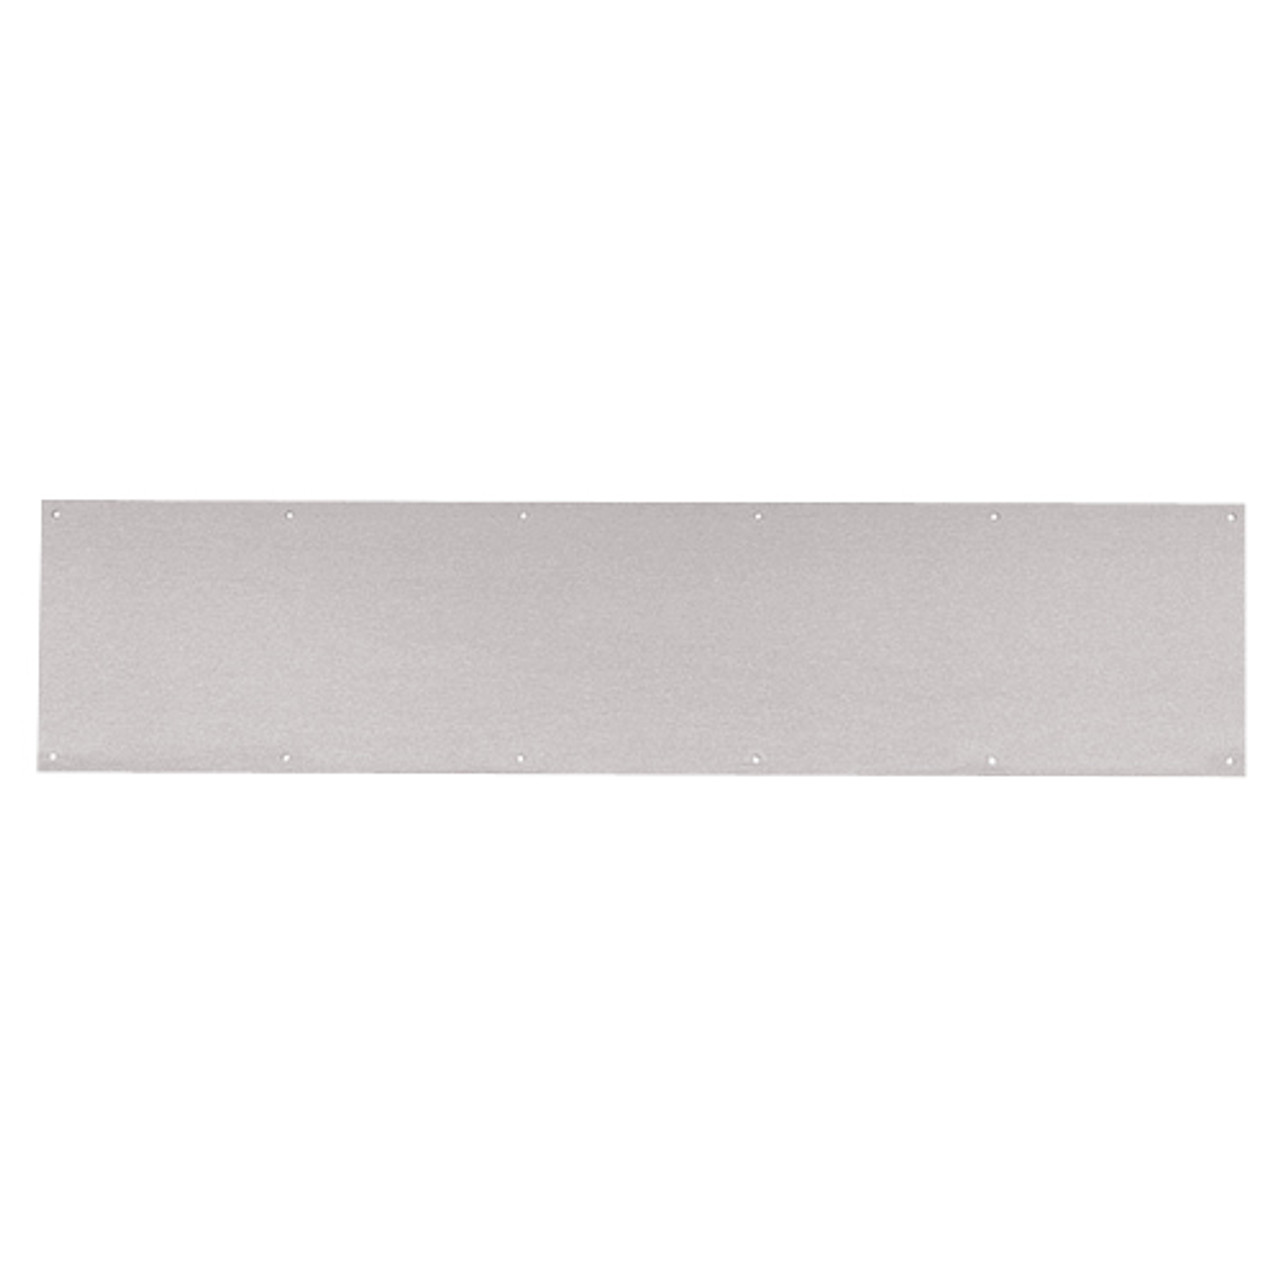 8400-US32D-24x26-B-CS Ives 8400 Series Protection Plate in Satin Stainless Steel